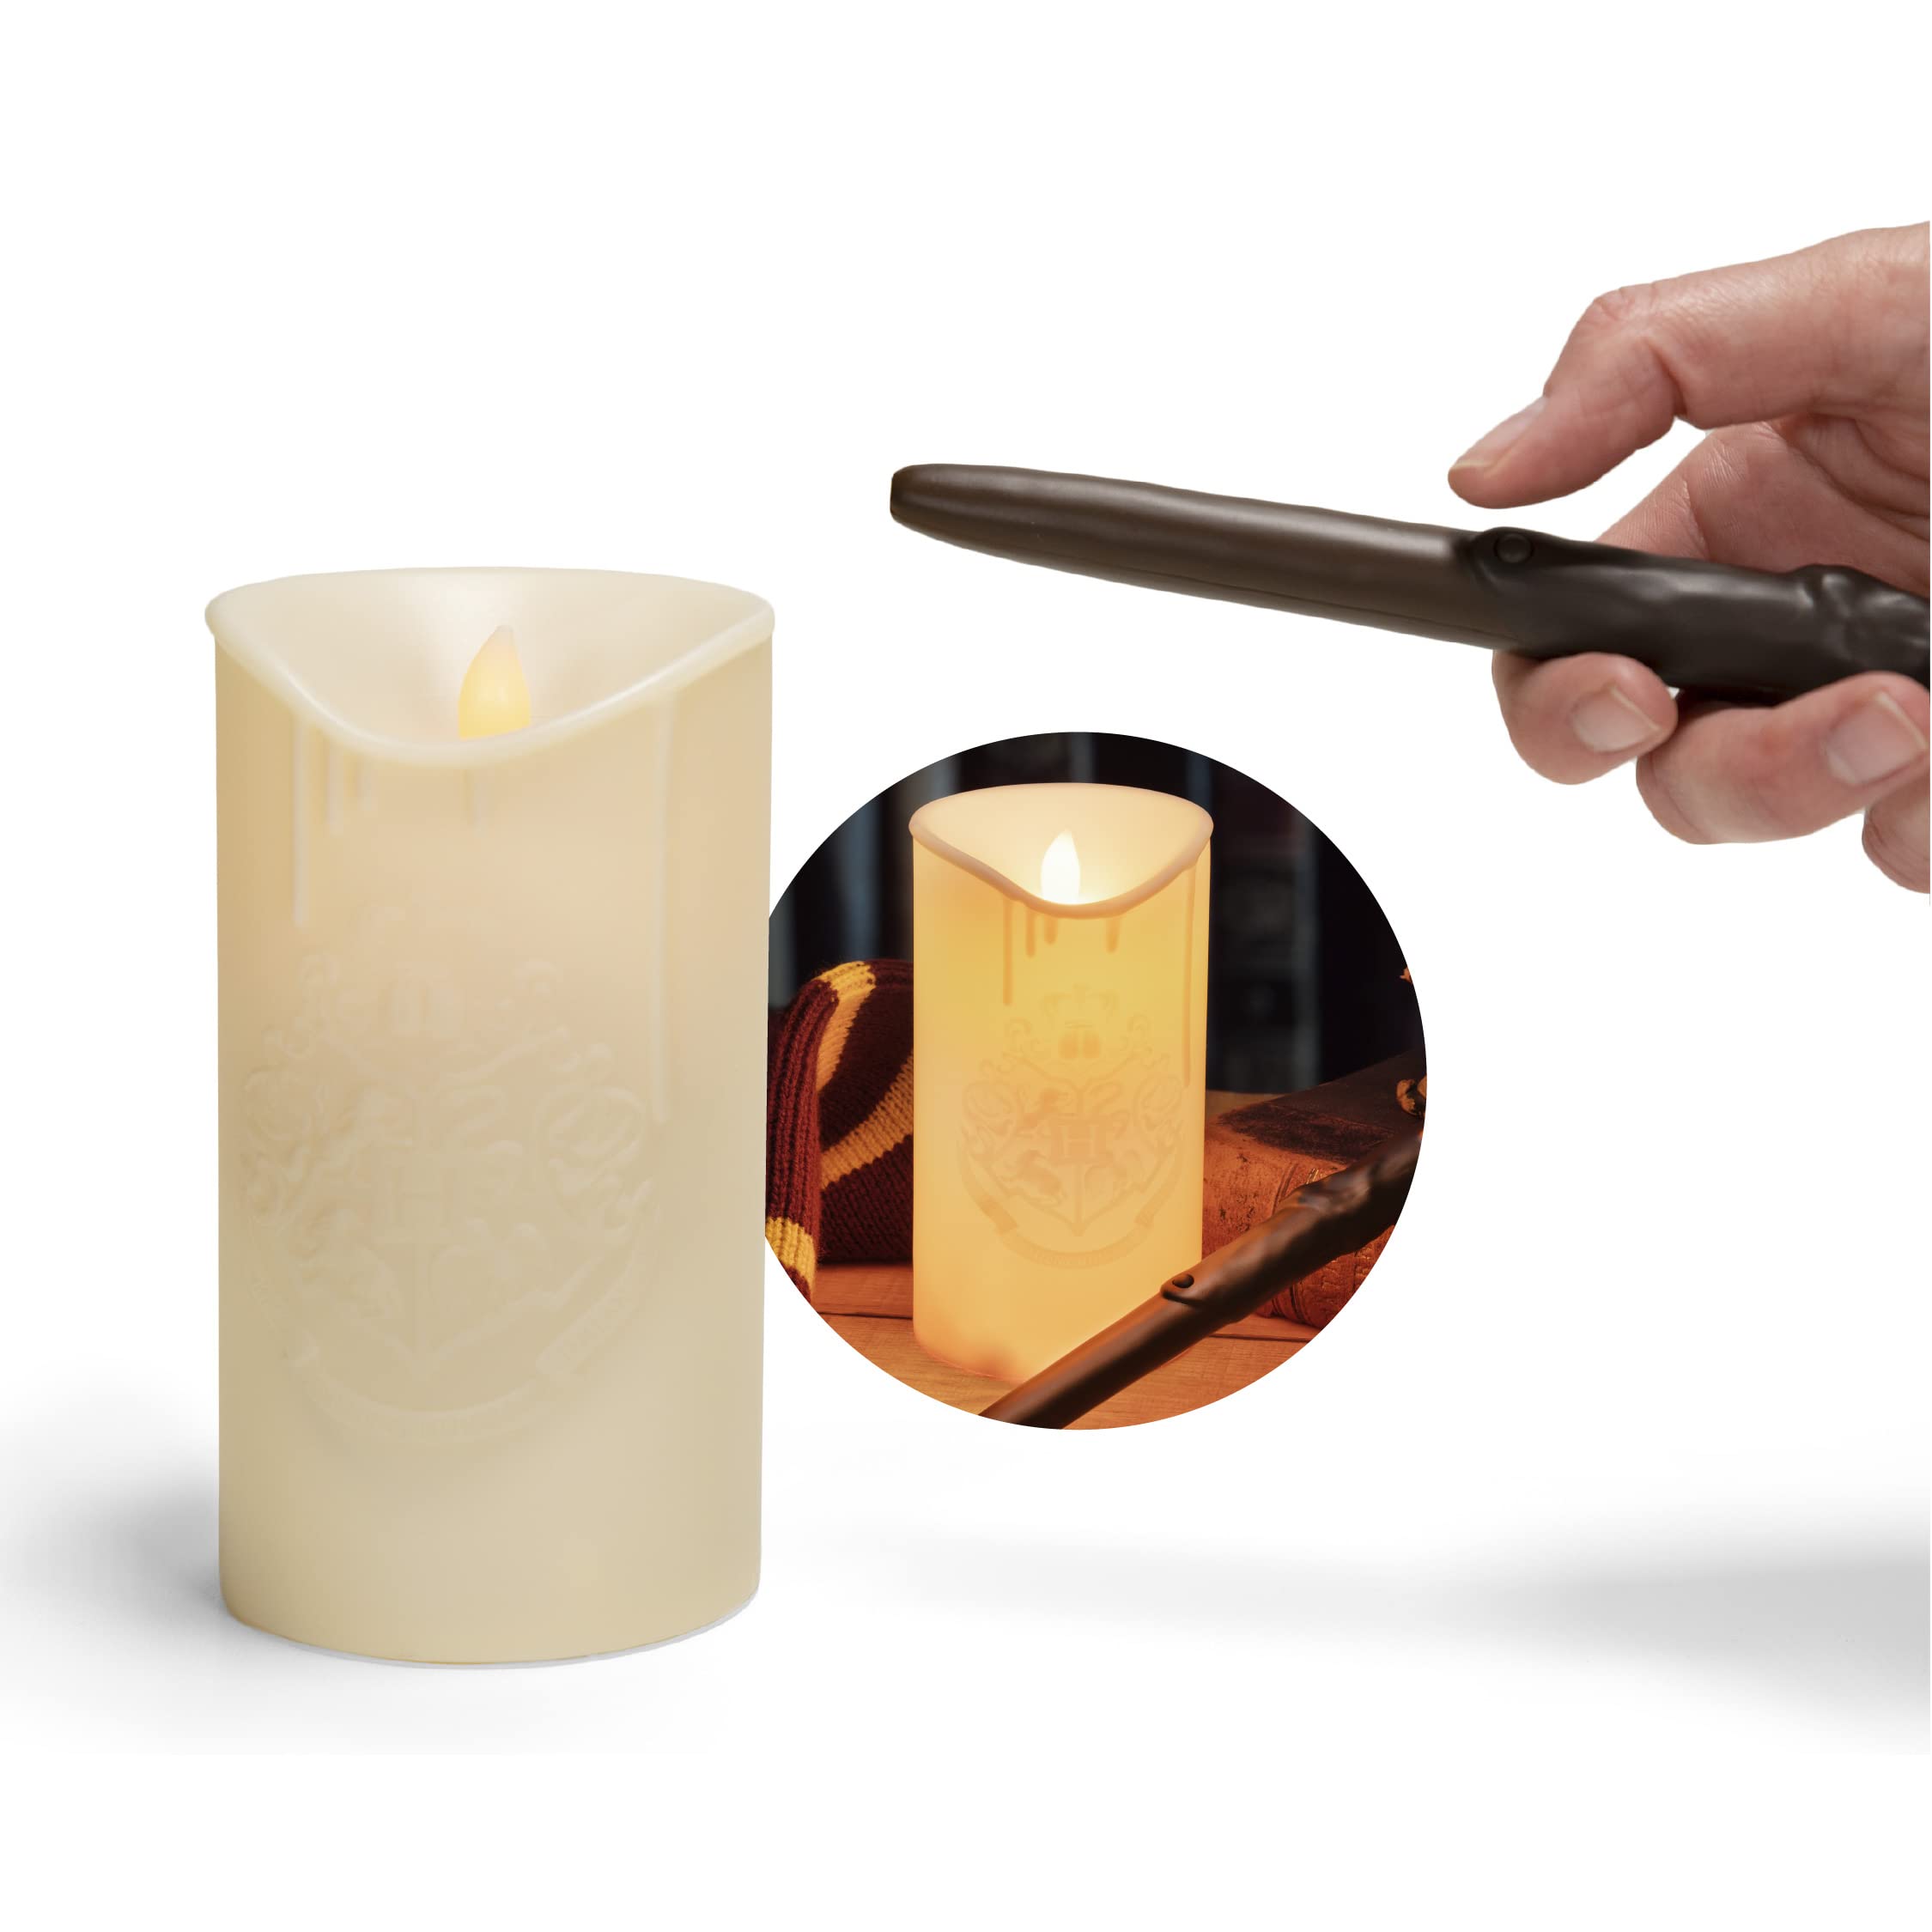 HP CANDLE LIGHT WAND REMOTE CONTROL